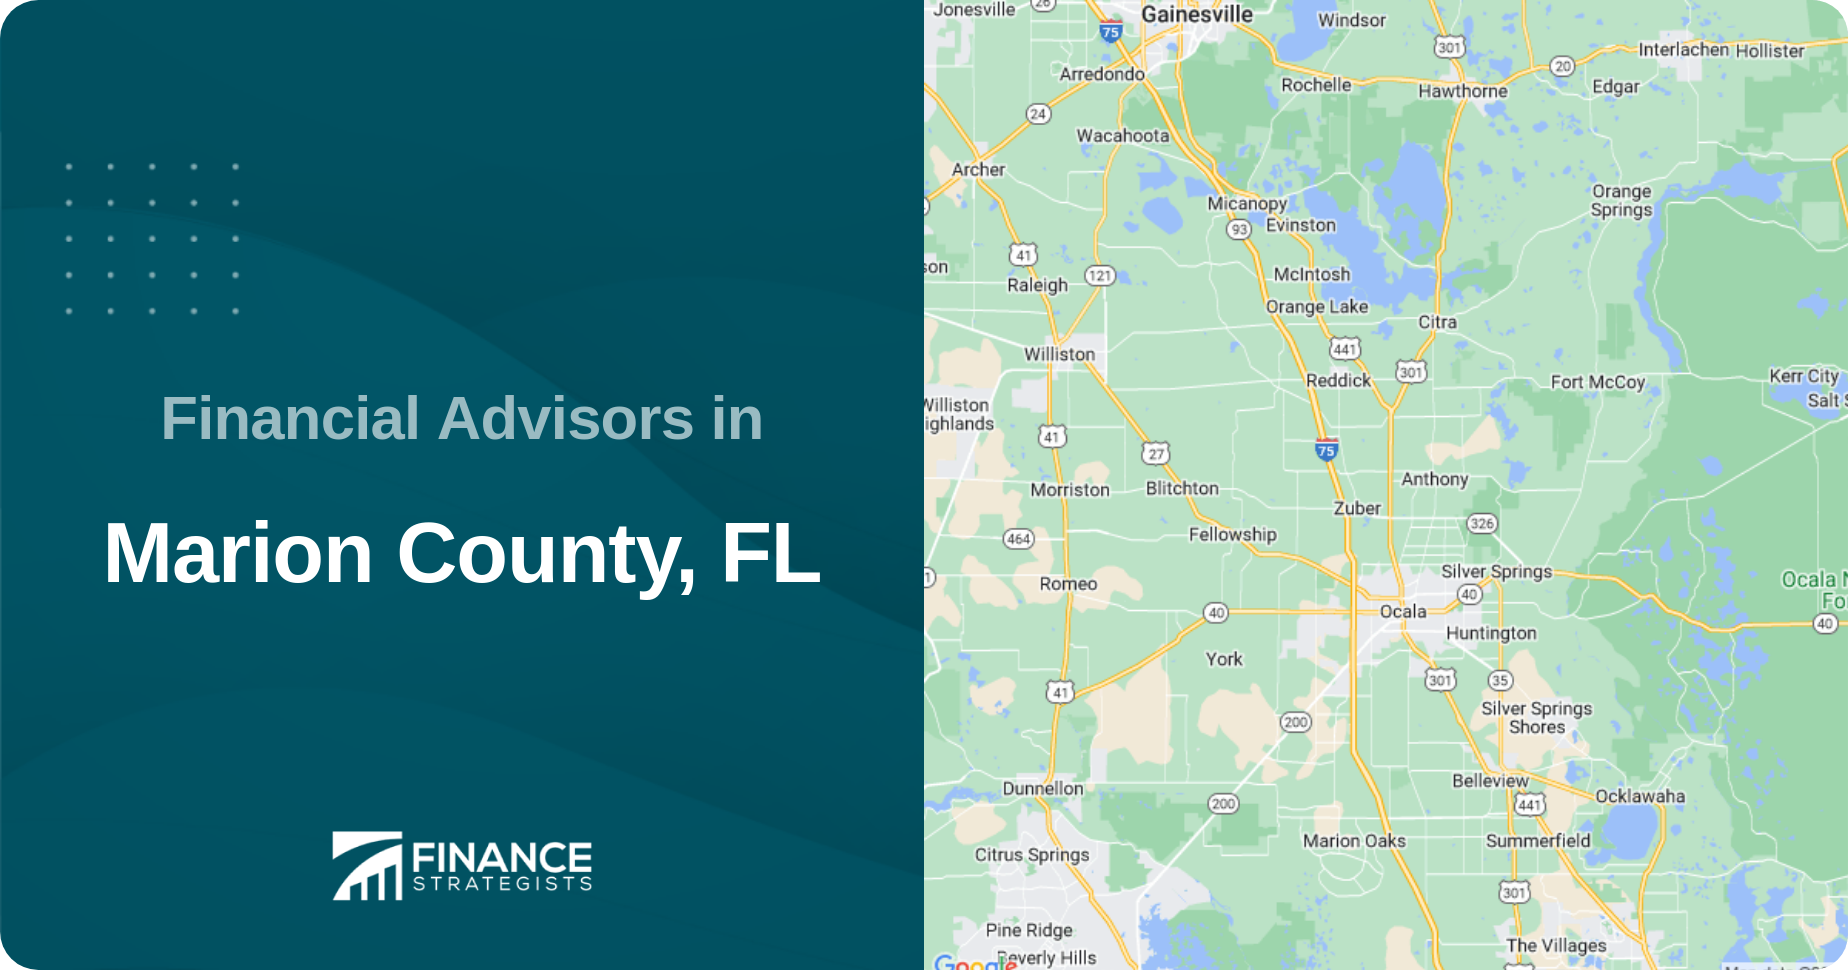 Financial Advisors in Marion County, FL